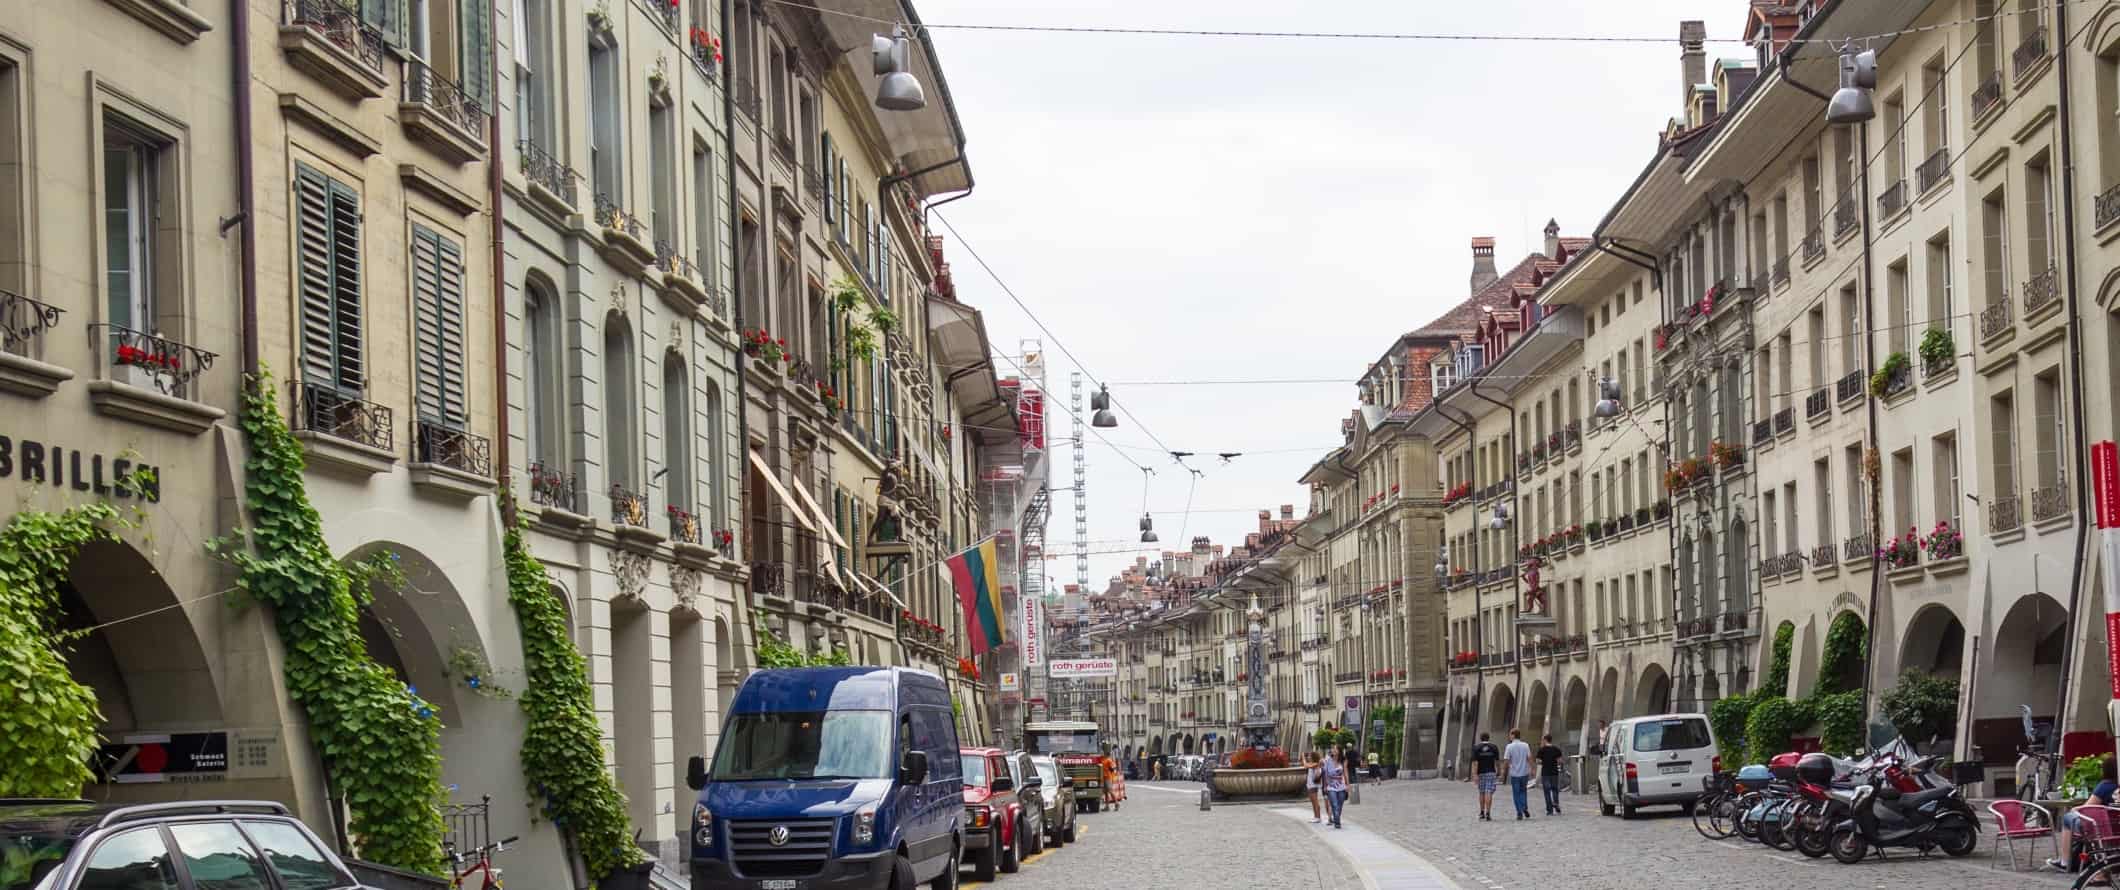 People walking down a cobblestone-lined street in the historic center of Bern, Switzerland